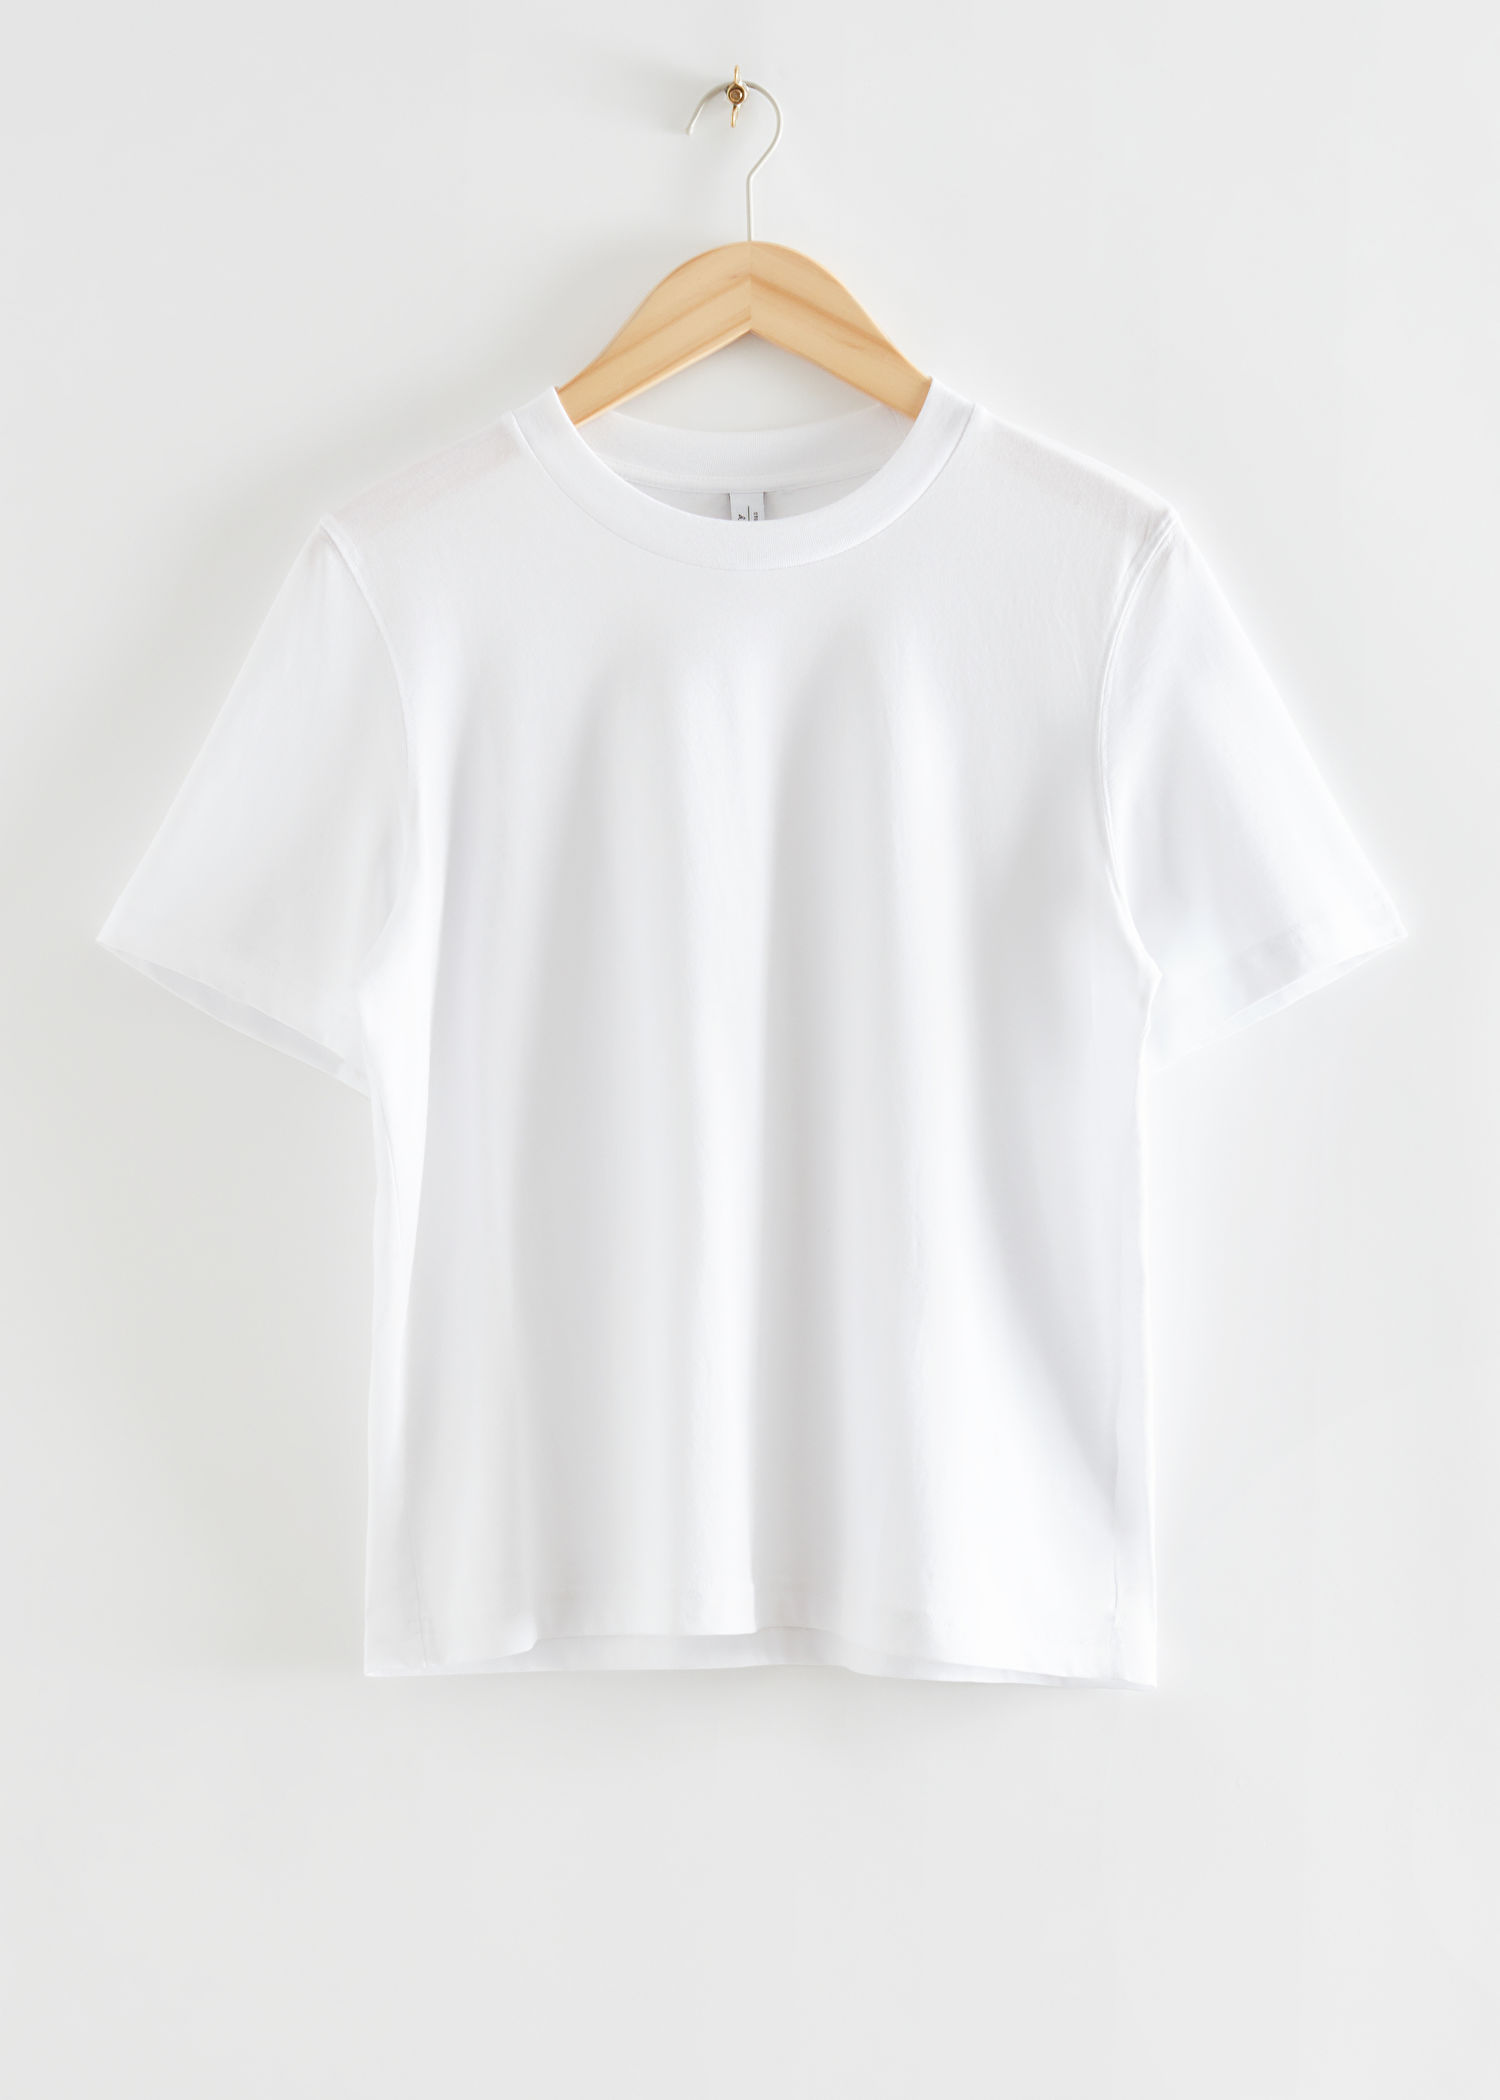 4 REASONS WHY YOU NEED THIS £19 T-SHIRT